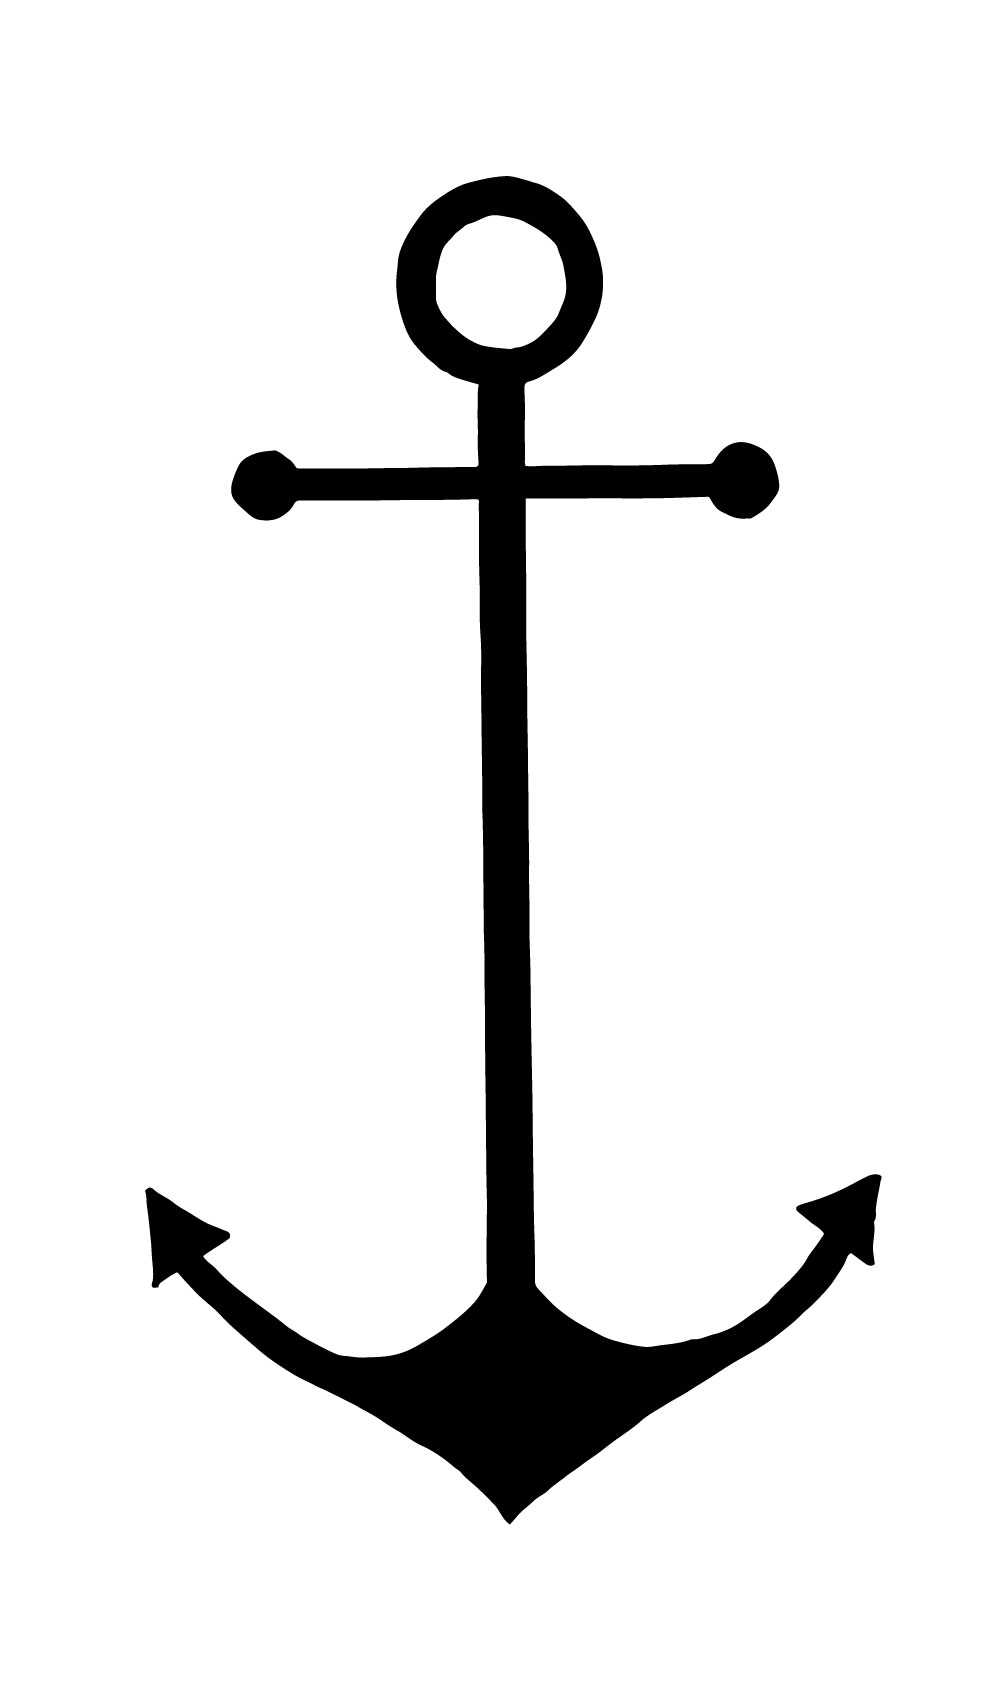 Anchor clipart black and white china cps Clipartix